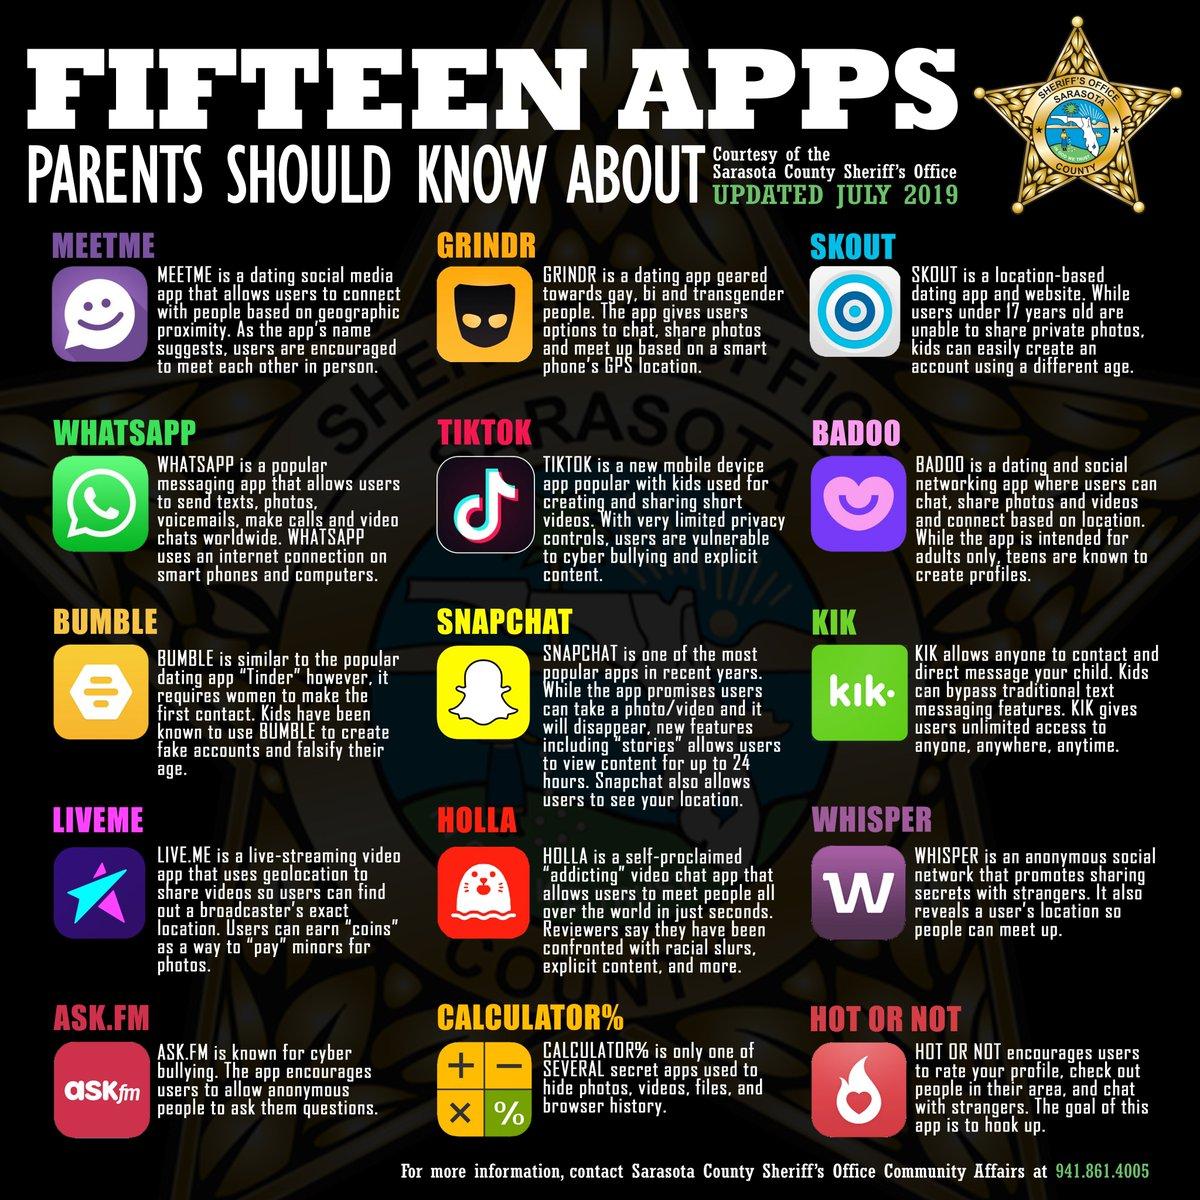 Sarasota County Sheriff's Office in Florida shared an updated list of apps parents should know about to help prevent their children from landing in the arms of online sex predators, on July 26, 2019. (Sarasota County Sheriff's Office via Twitter)